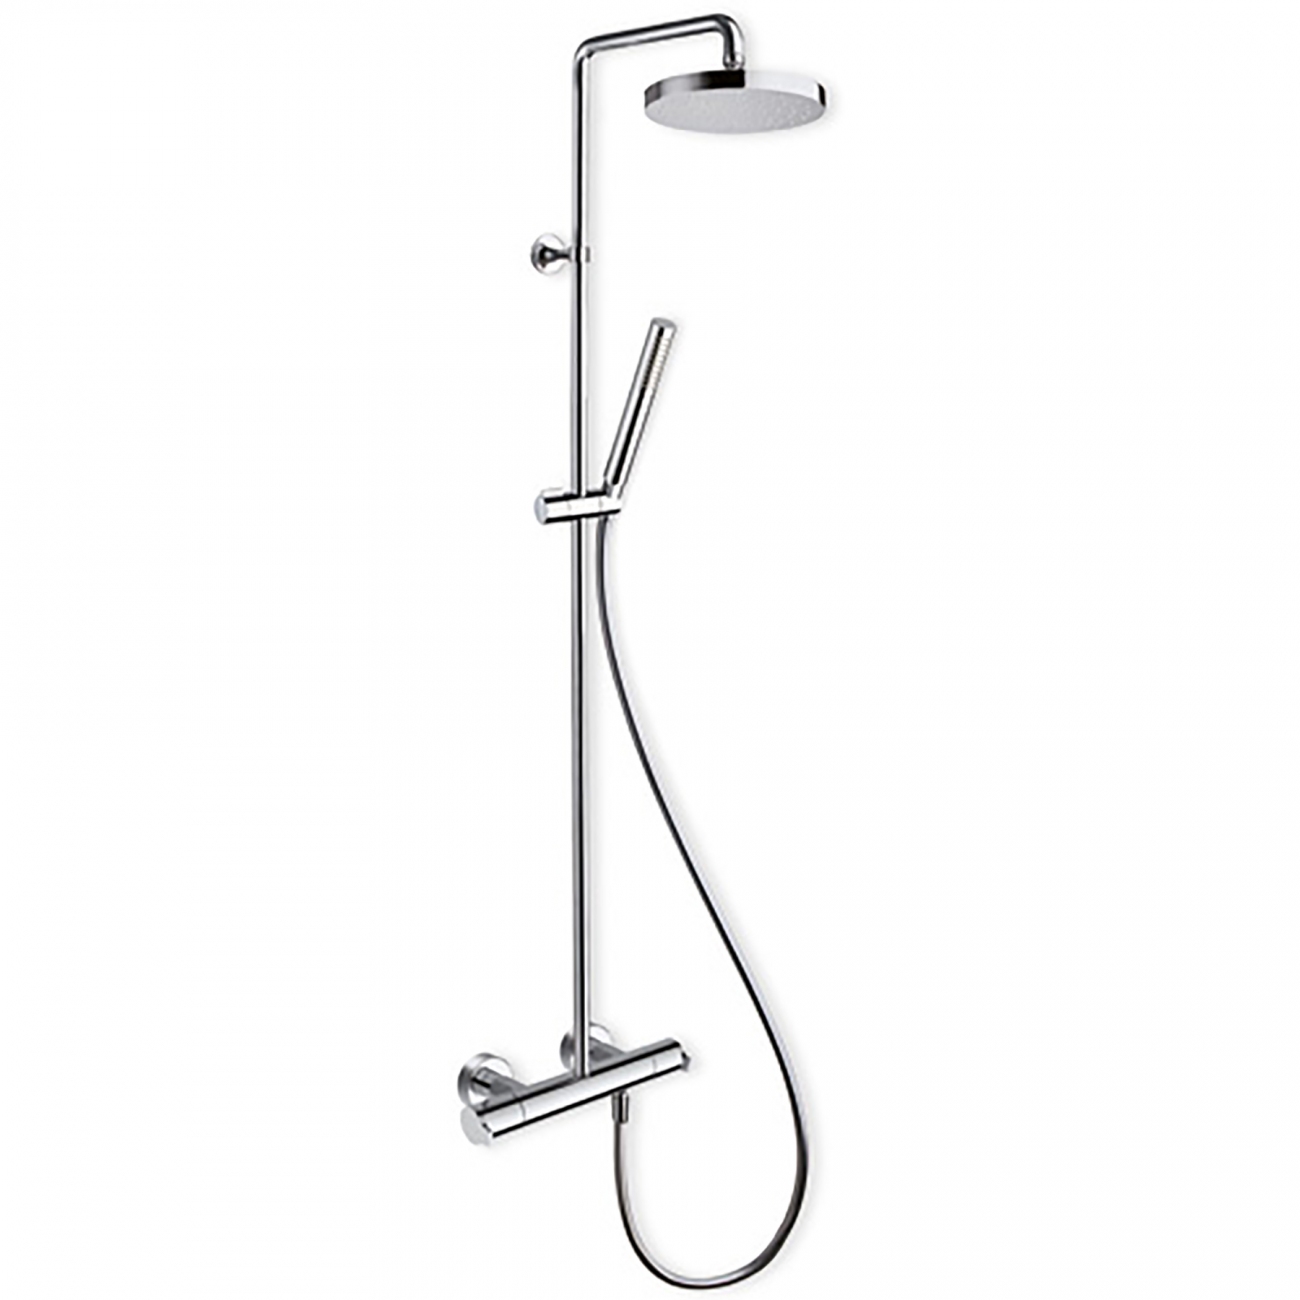 Cristina Contemporary Lines Diario Wall Mounted Shower Thermostatic Mixer